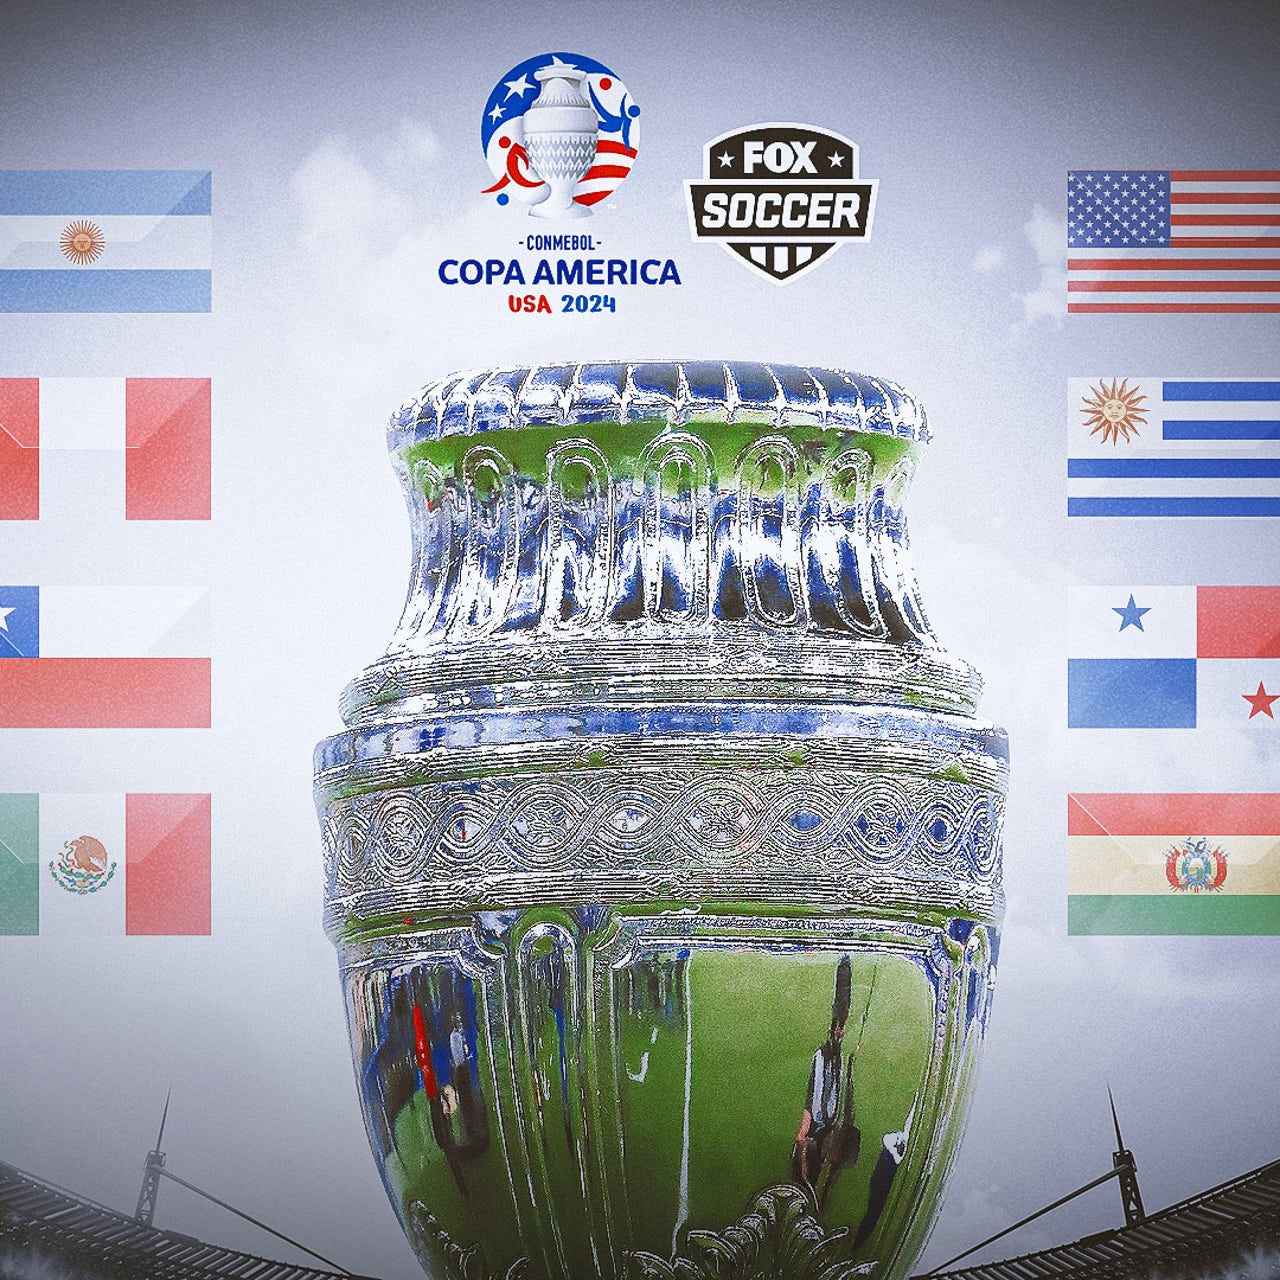 https://a57.foxsports.com/statics.foxsports.com/www.foxsports.com/content/uploads/2023/12/1280/1280/12.08.23_2024-Copa-America-Groups-Breaking-down-USAs-path-to-knockout-stage_16x9.jpg?ve=1&tl=1